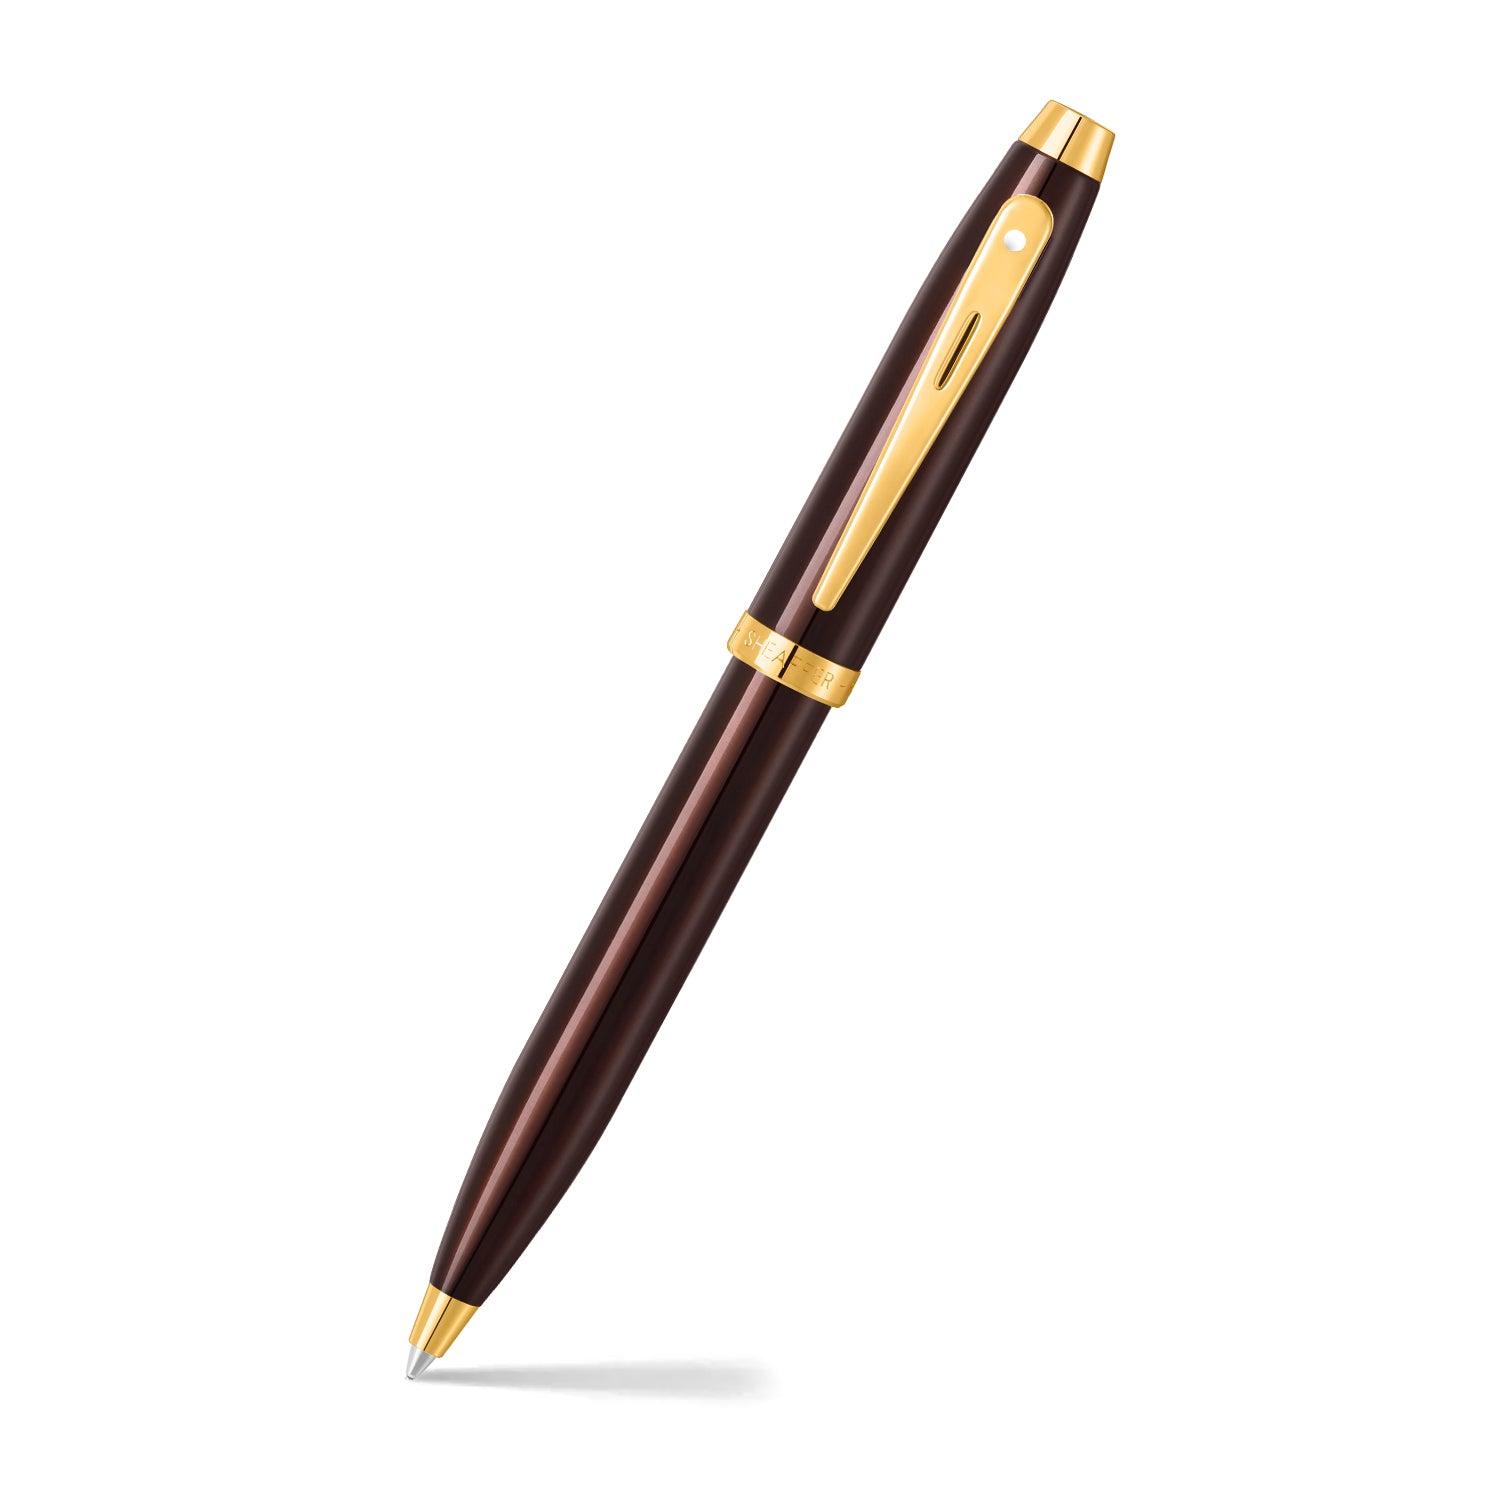 The Sheaffer® 100 9370 Glossy Coffee Brown Ballpoint Pen With PVD Gold-Tone Trim, a brown pen with gold trim, offers a exceptional writing experience, making it a perfect gift.